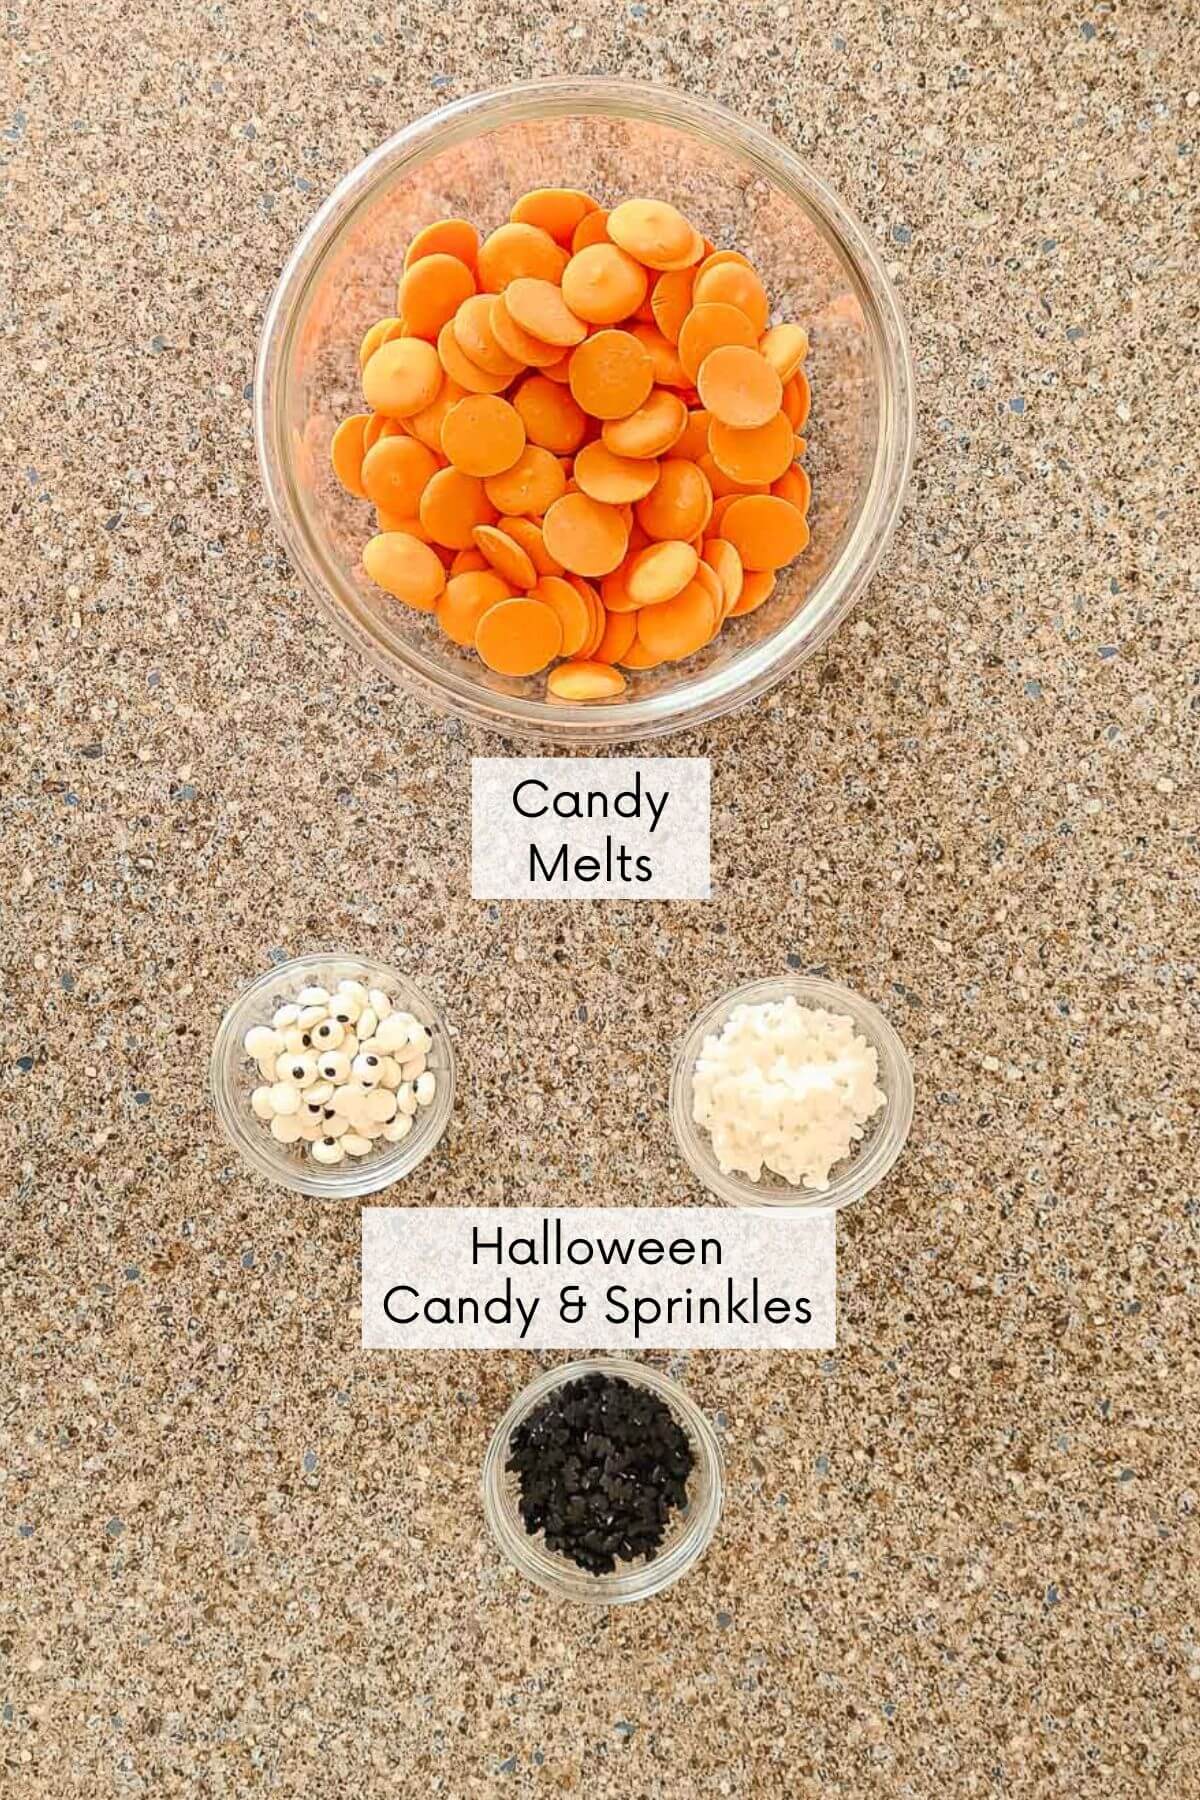 Halloween boo bark recipe ingredients in bowls with labels.